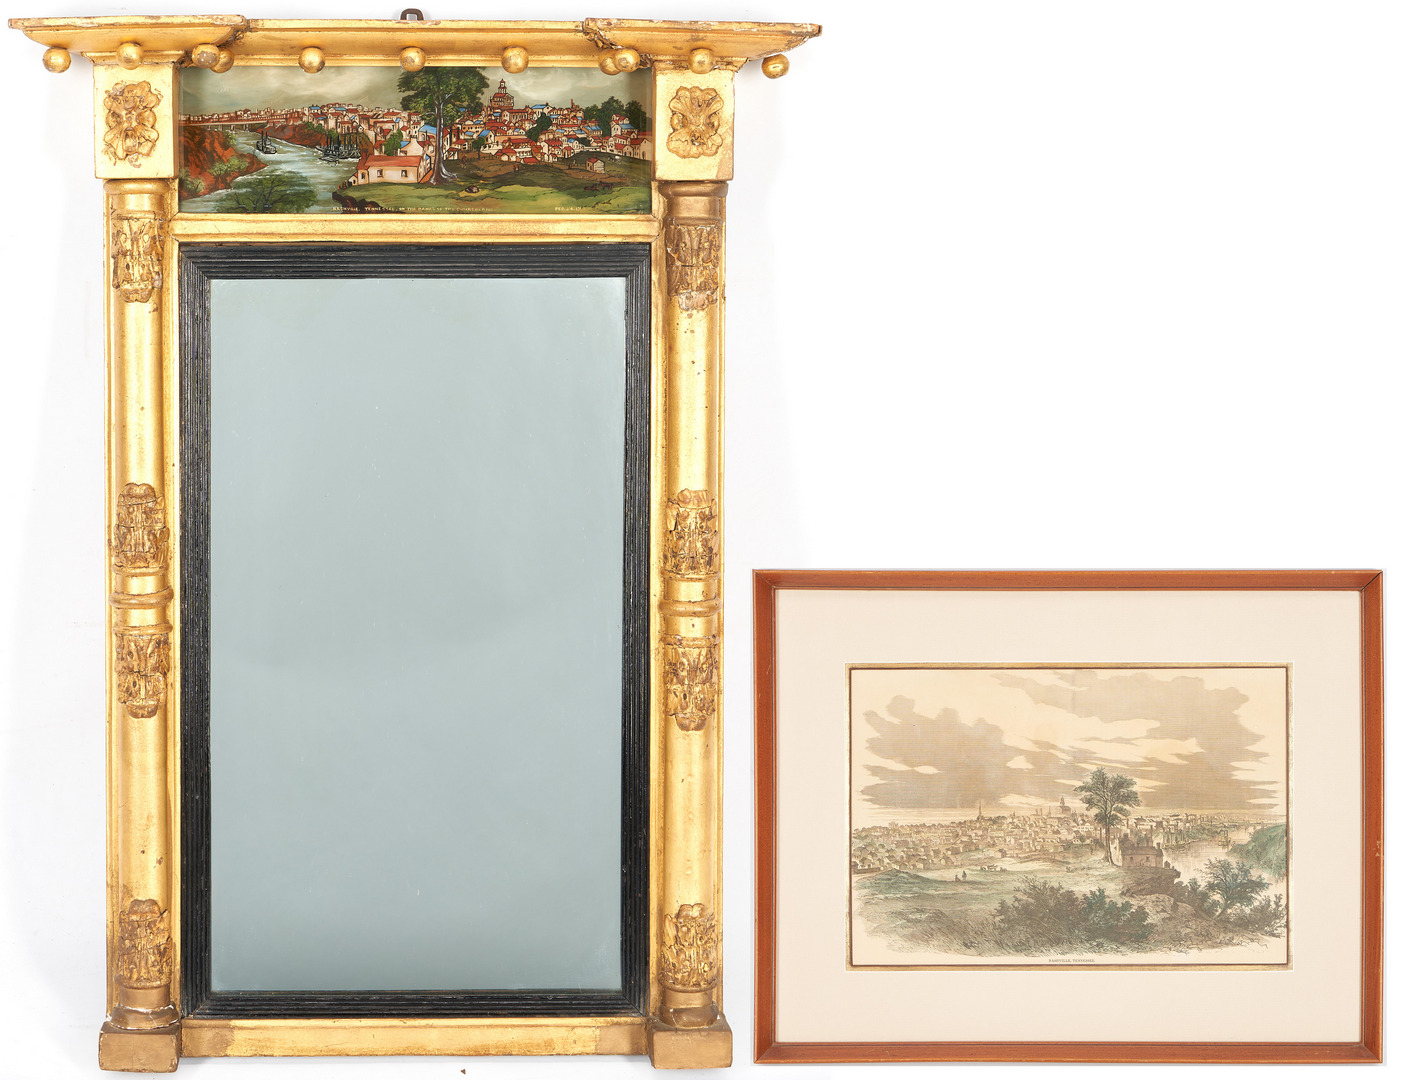 Lot 510: Nashville Related Antique Mirror and Engraving, 2 items